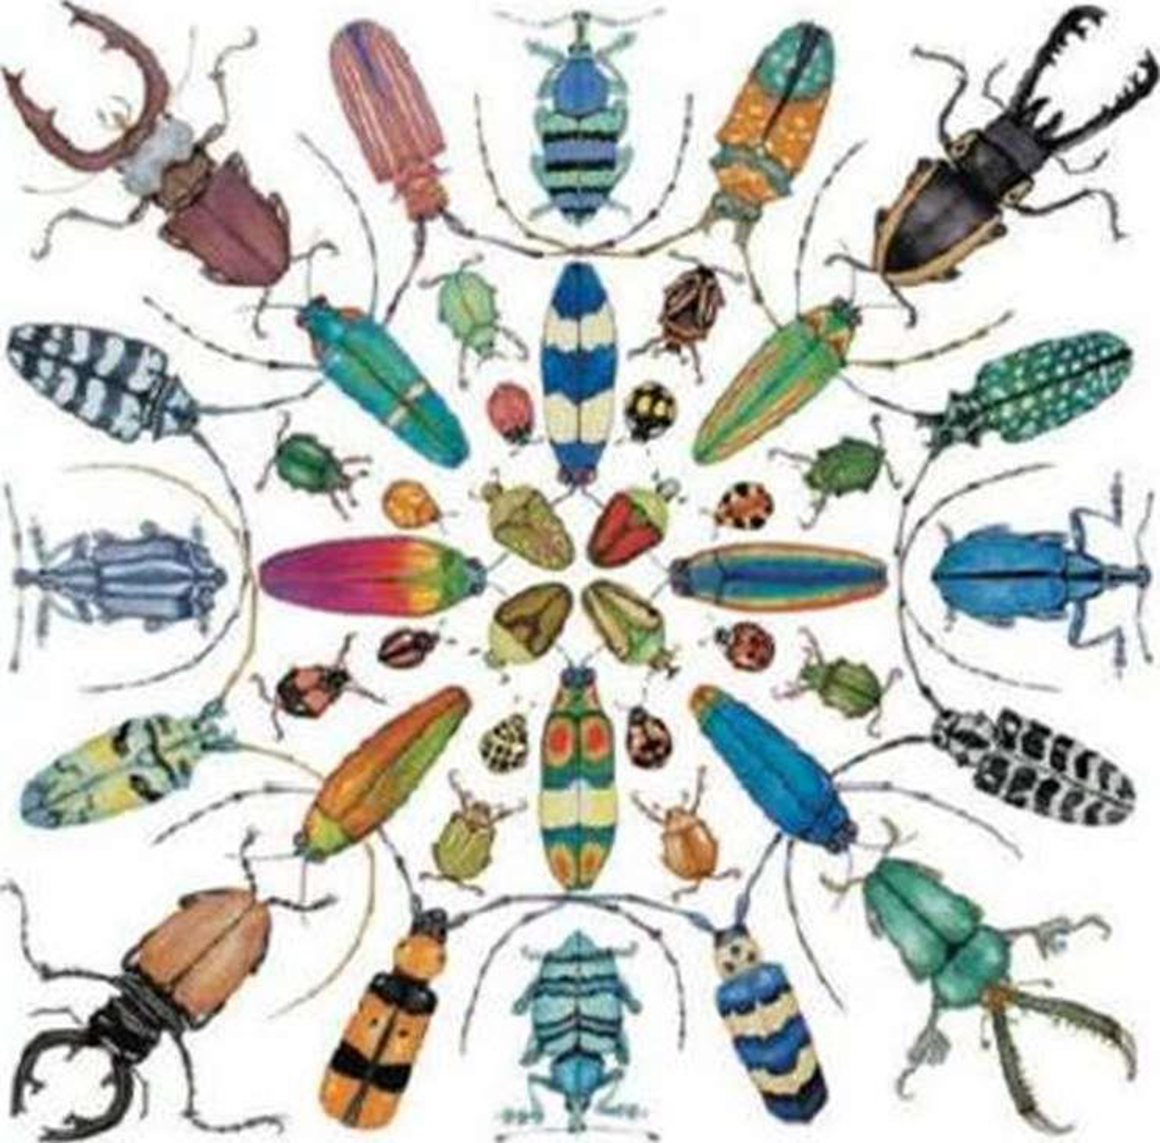 Chapter 33, Problem 10TYU, SYNTHESIZE YOUR KNOWLEDGE Colleclively, do these beetles and all other invertebrate species combined 